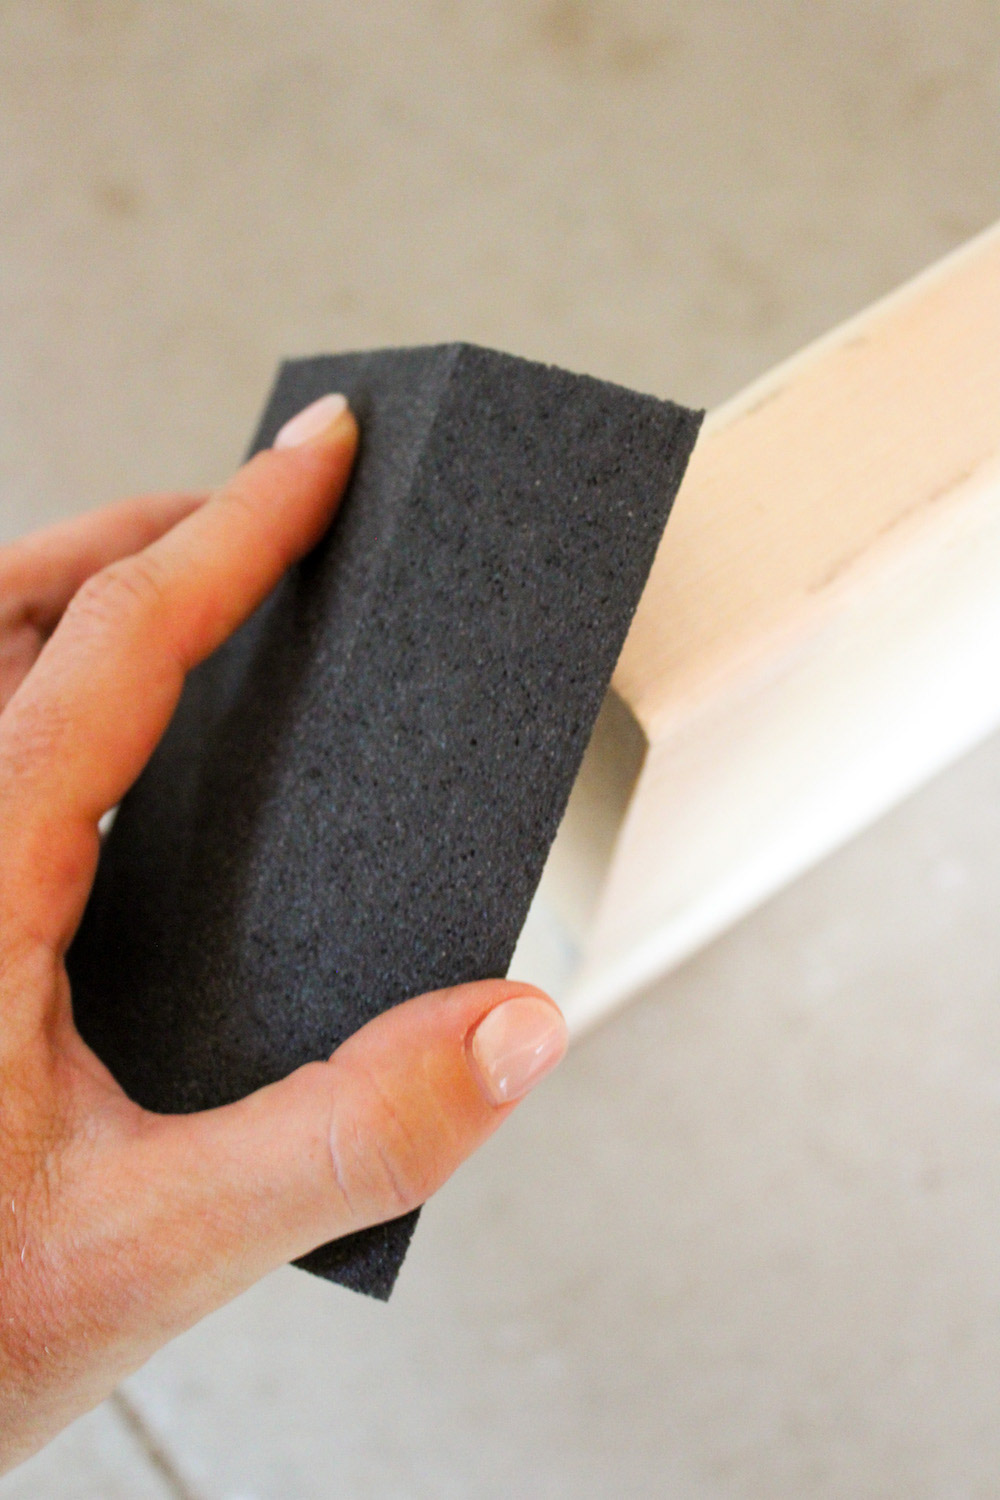 A person uses a sanding block to sand a piece of wood.